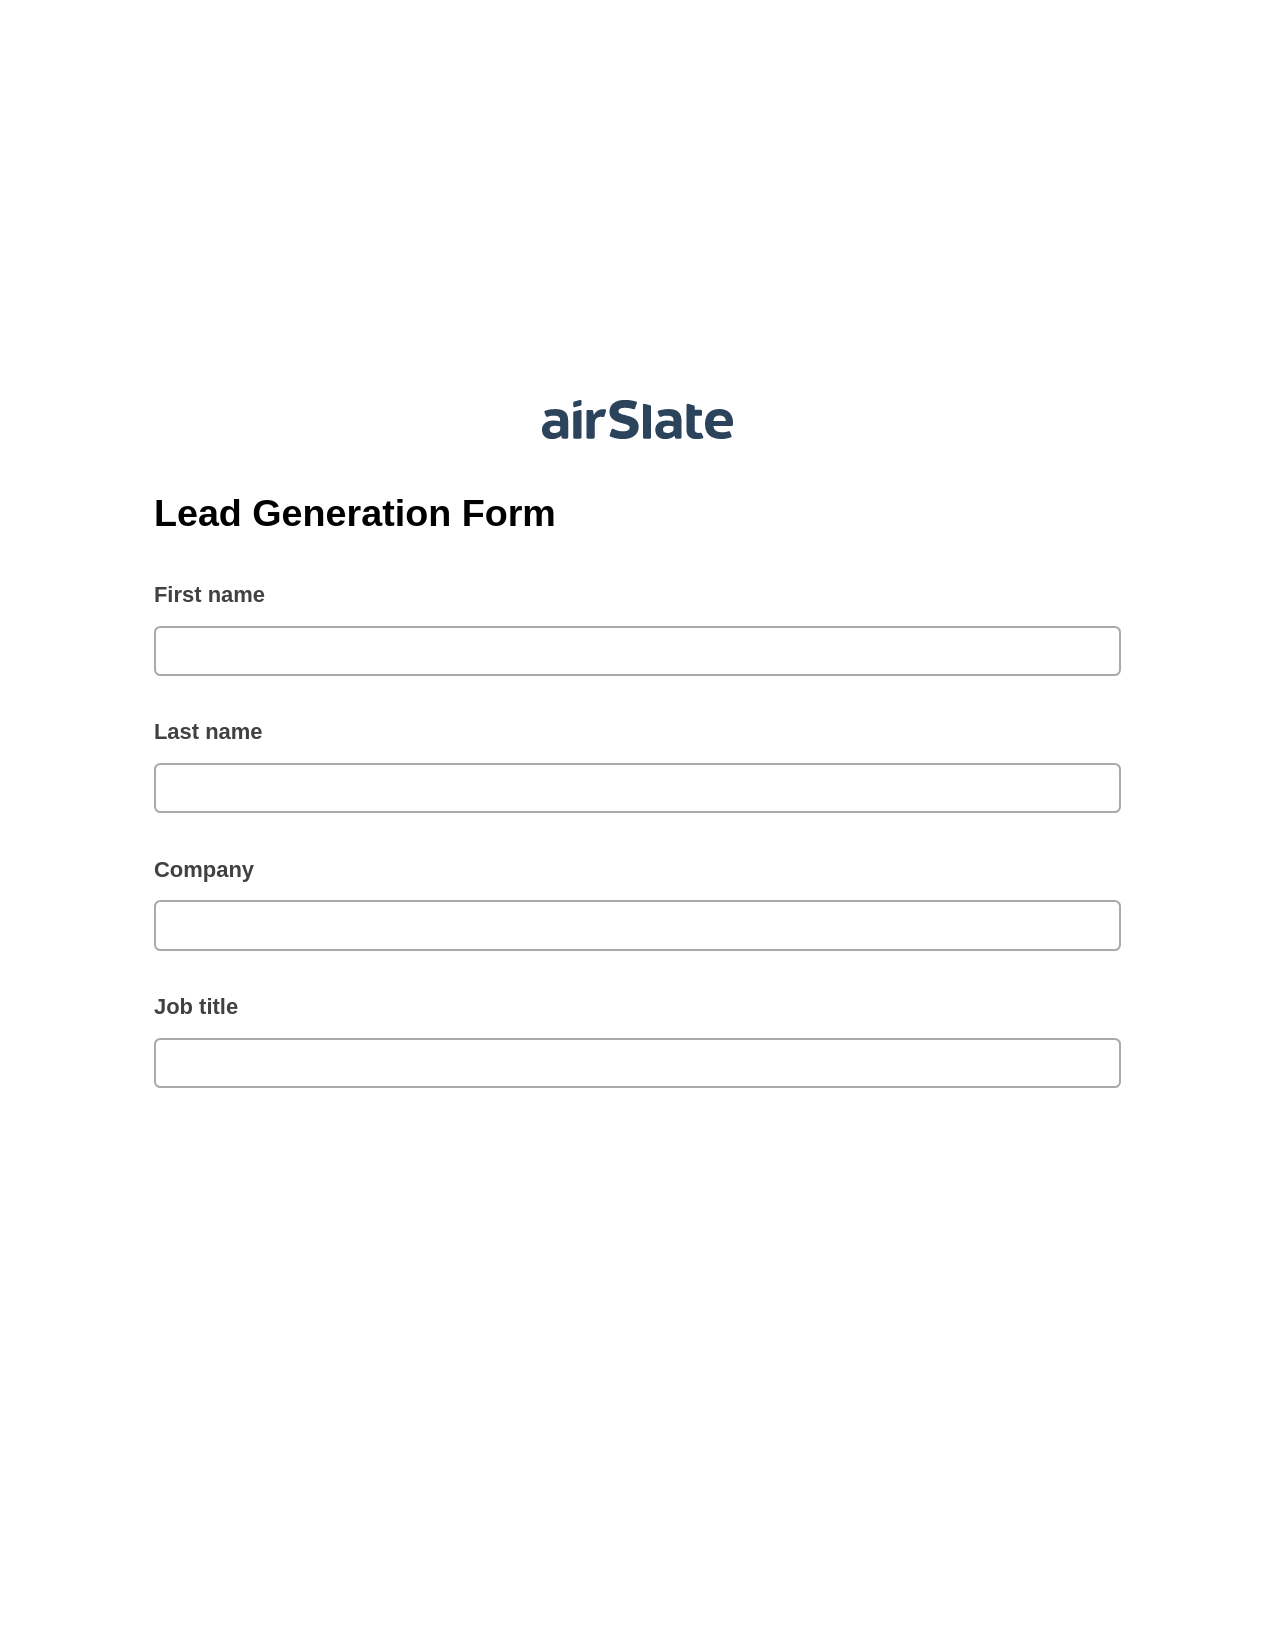 Lead Generation Form Pre-fill from Google Sheets Bot, Custom Field's Value Bot, Archive to Dropbox Bot